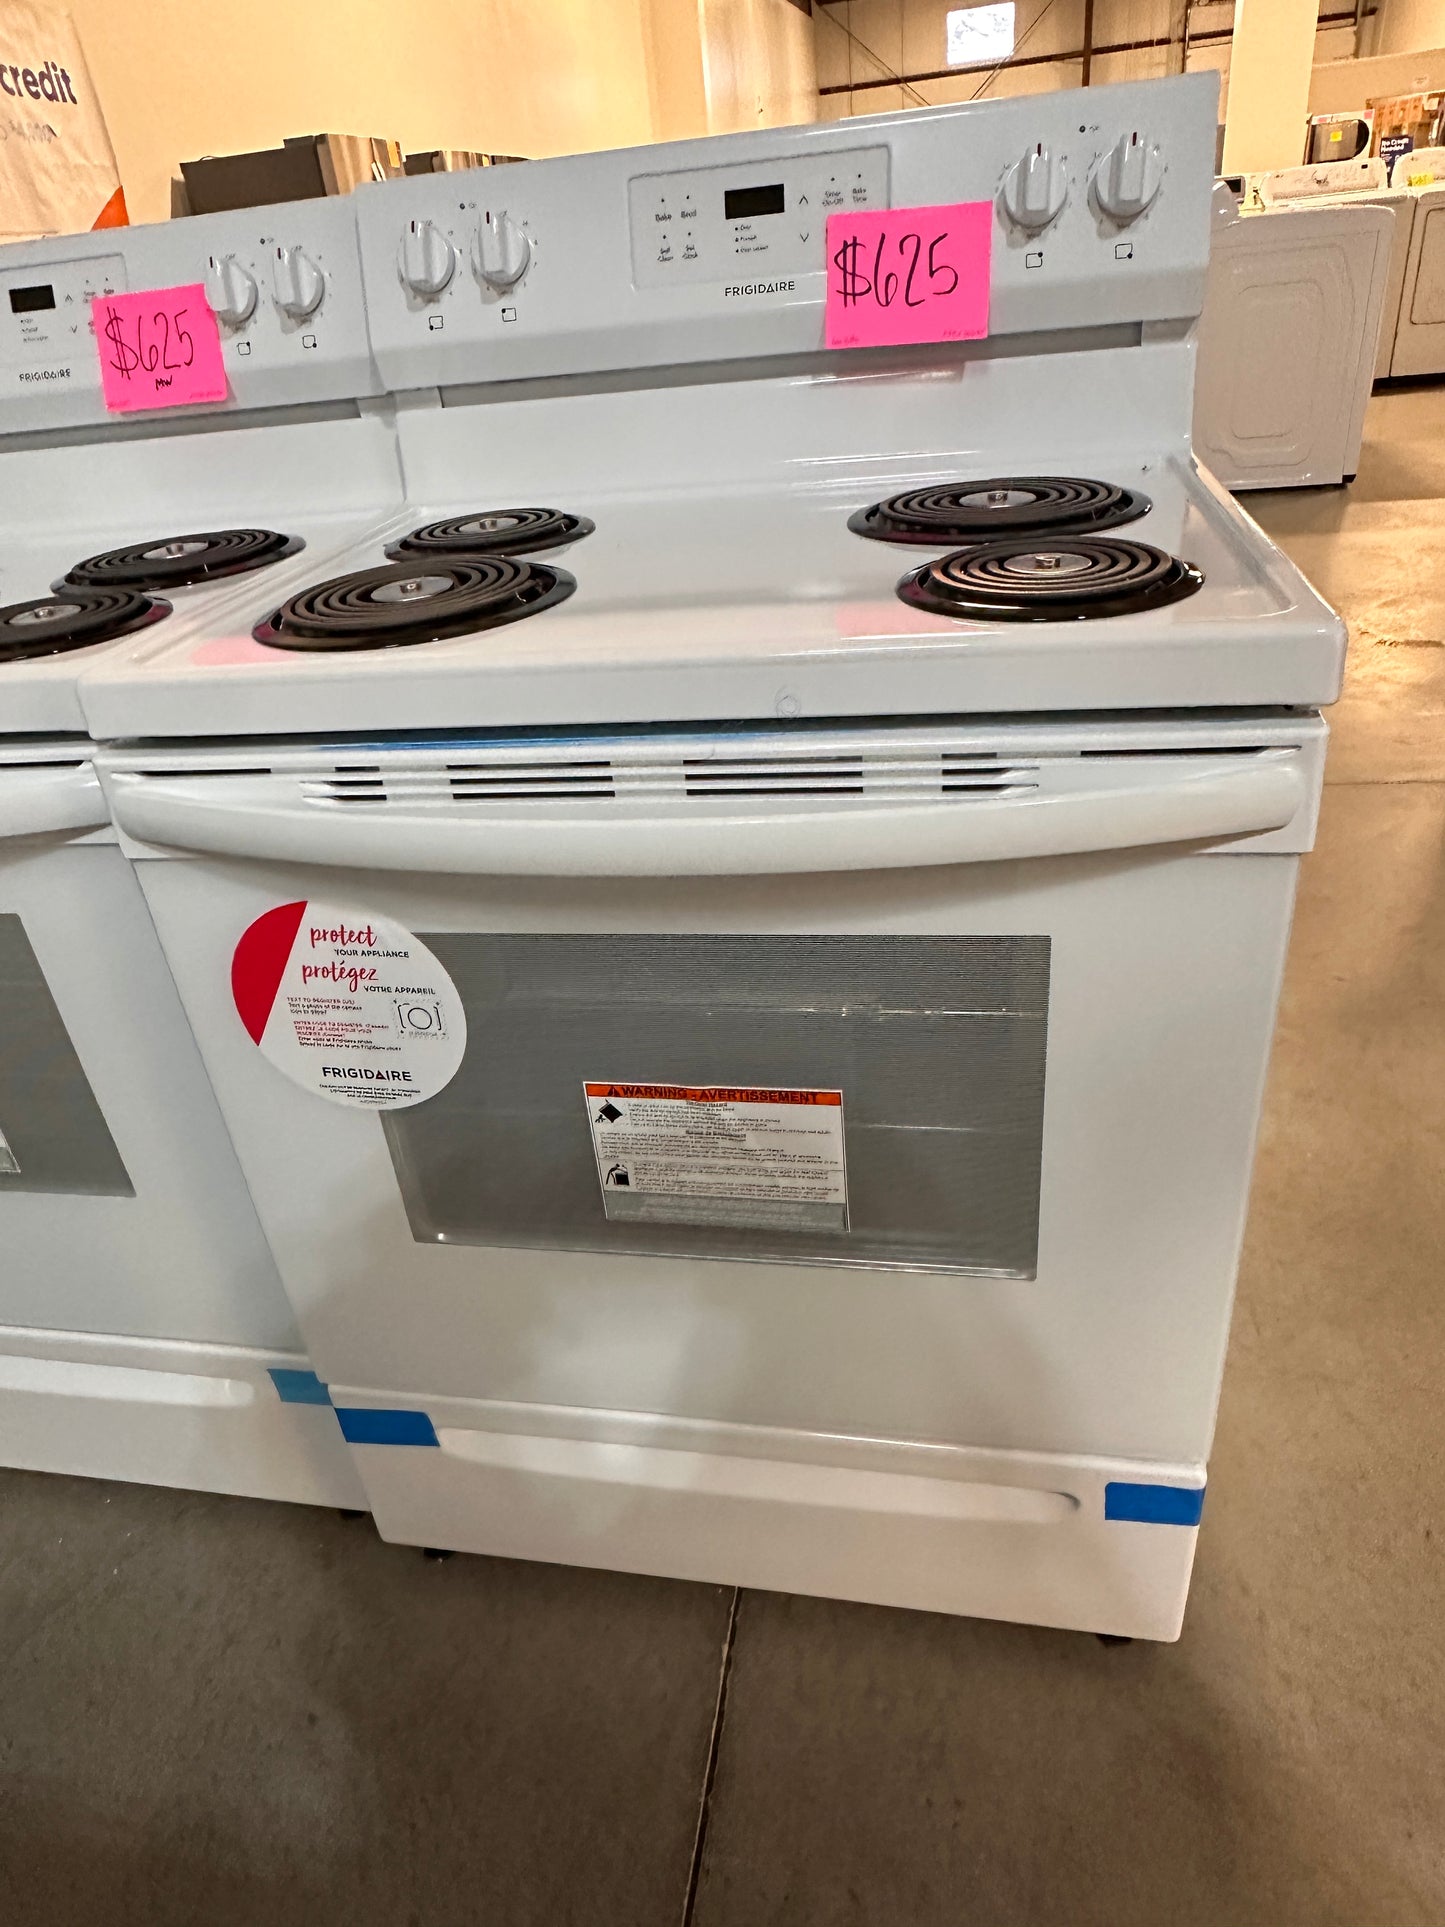 ON SALE FRIGIDAIRE 30 in. 5.3 cu. ft. Electric Range with Self Clean in White  FFEF3016VW  RAG11698